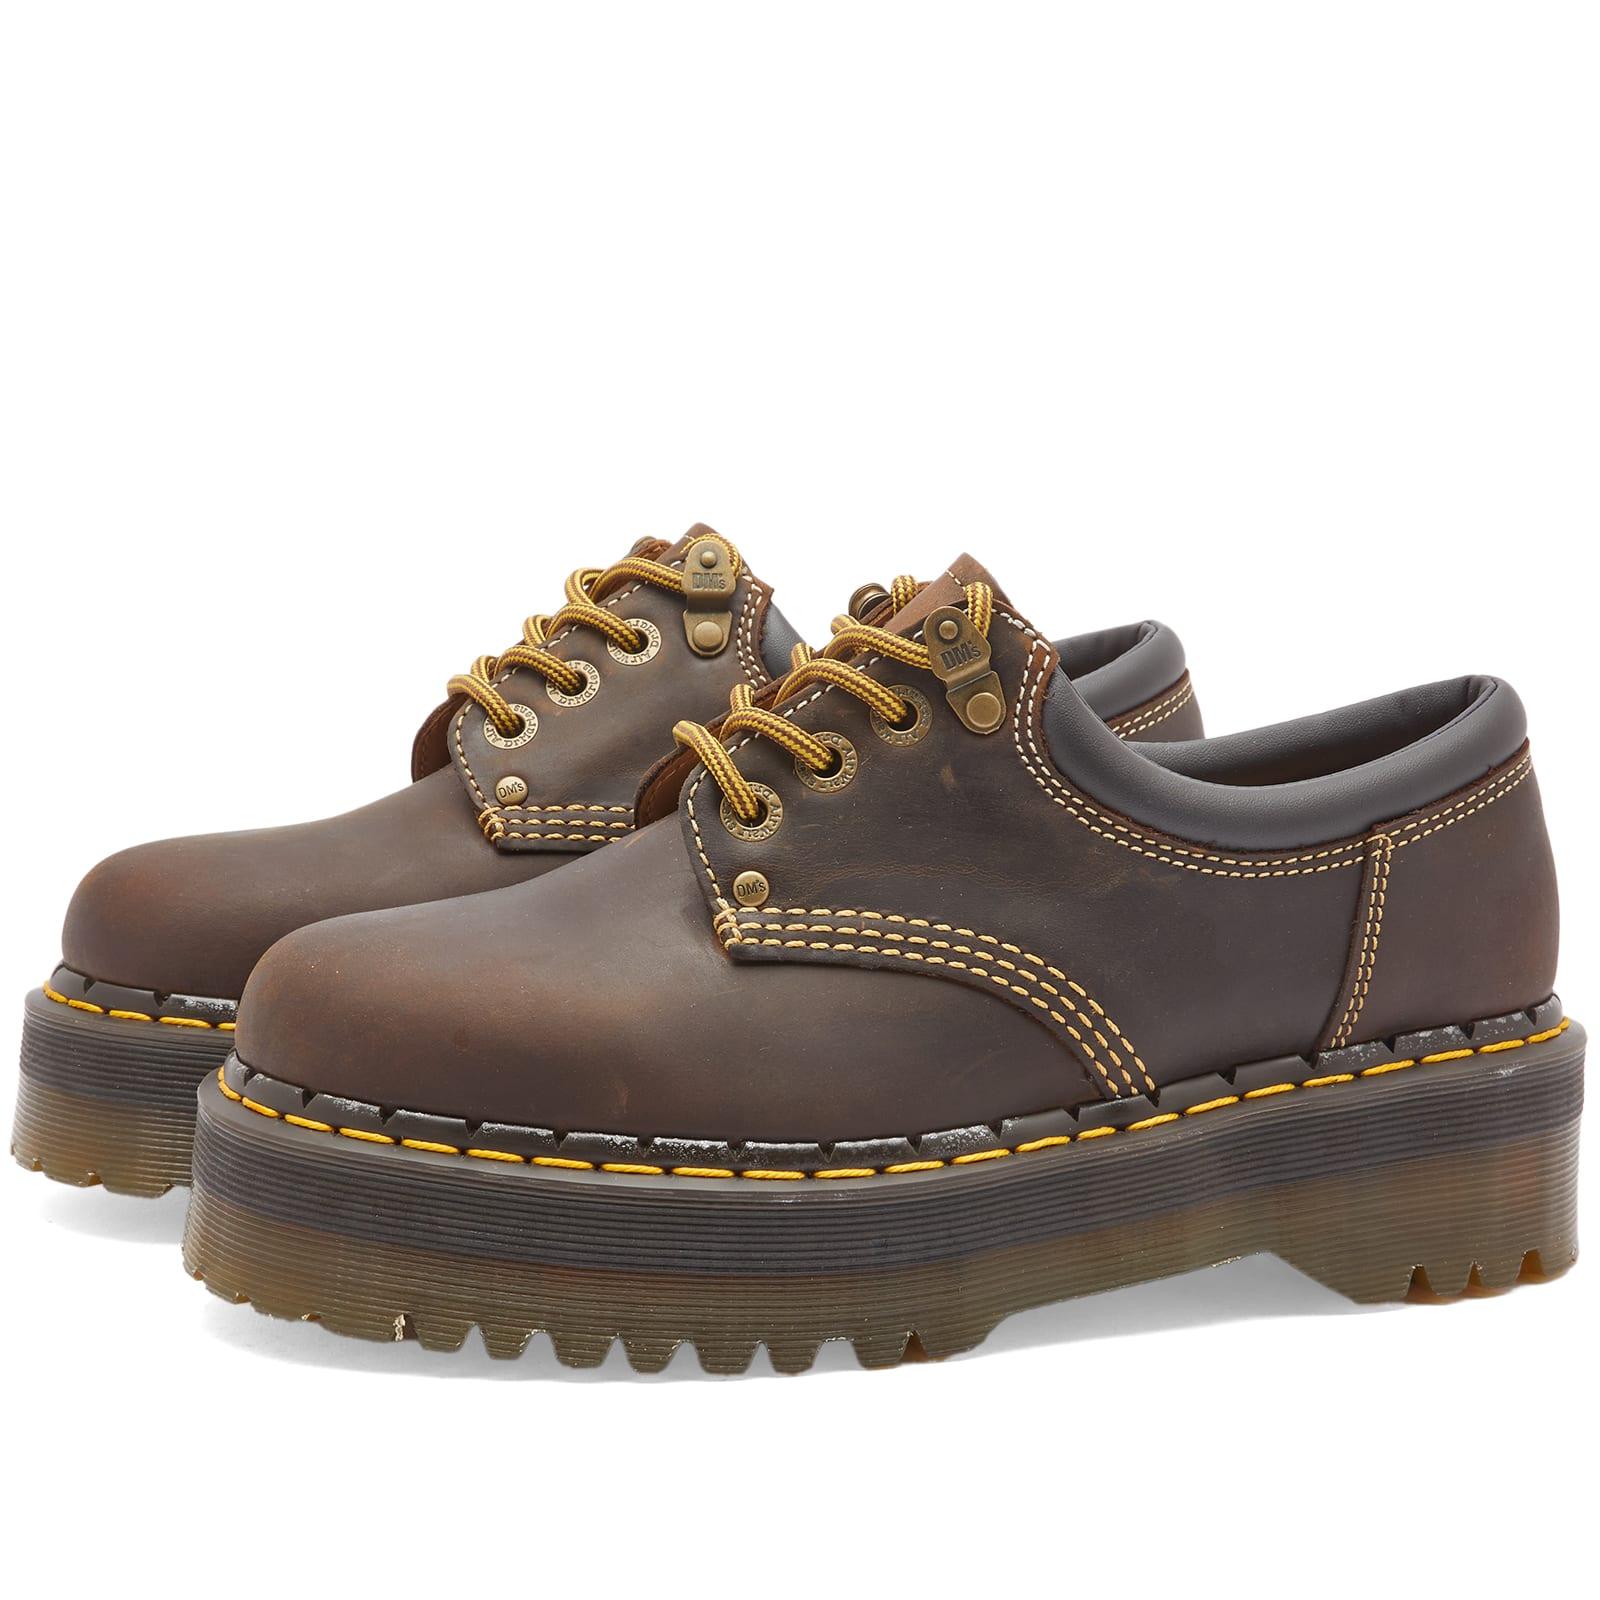 Dr. Martens 8053 Quad Ii Shoes in Brown | Lyst